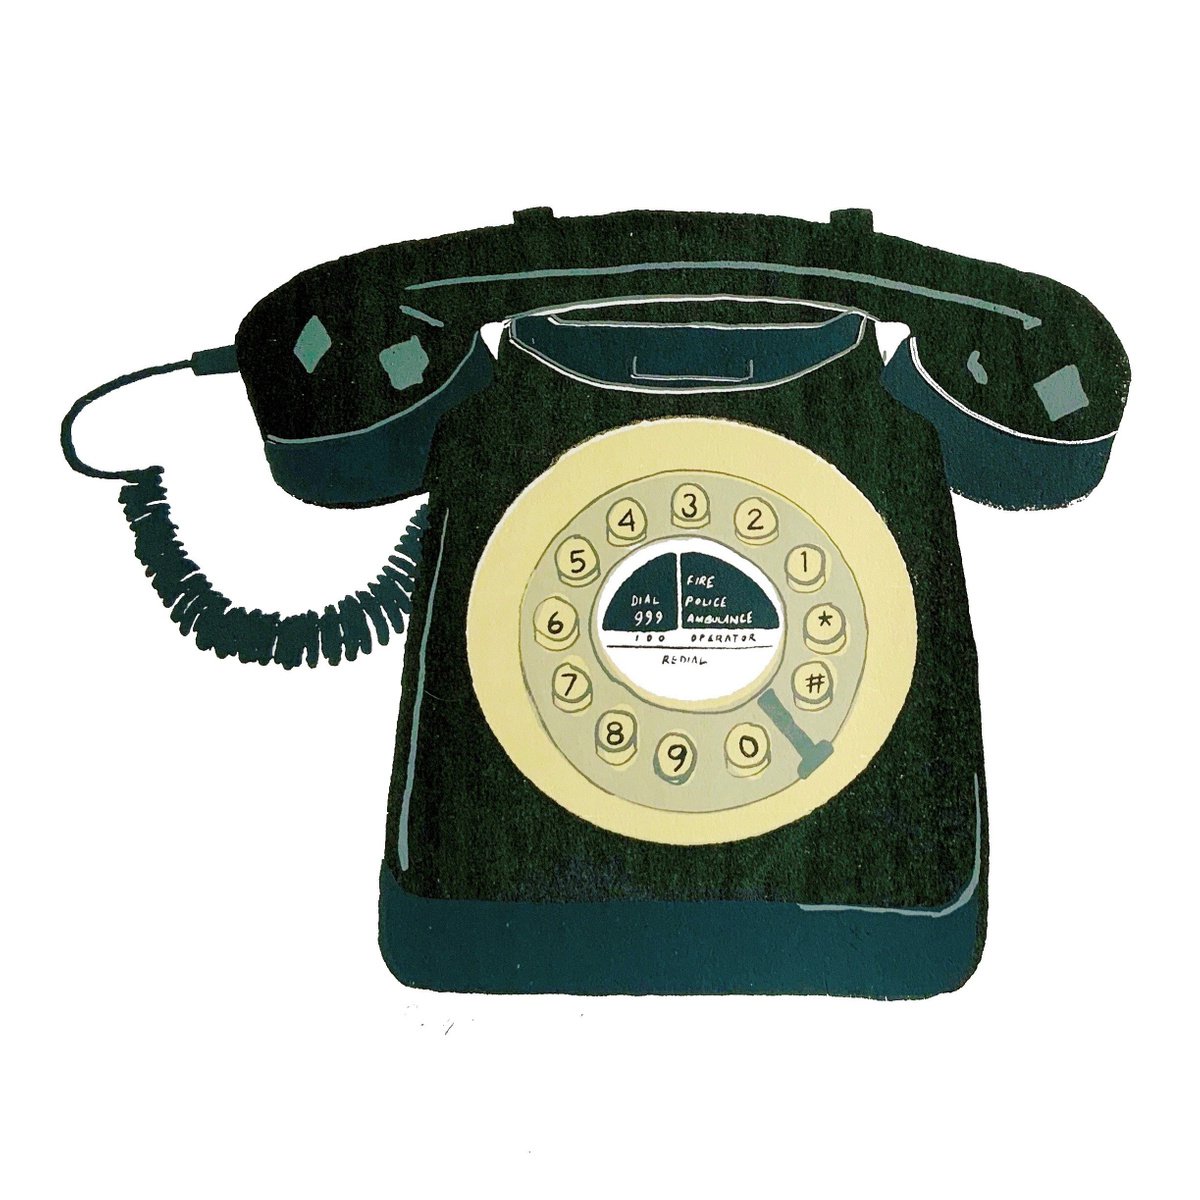 GPO 746 - Limited-edition, vintage telephone [BLACK] by Design Smith